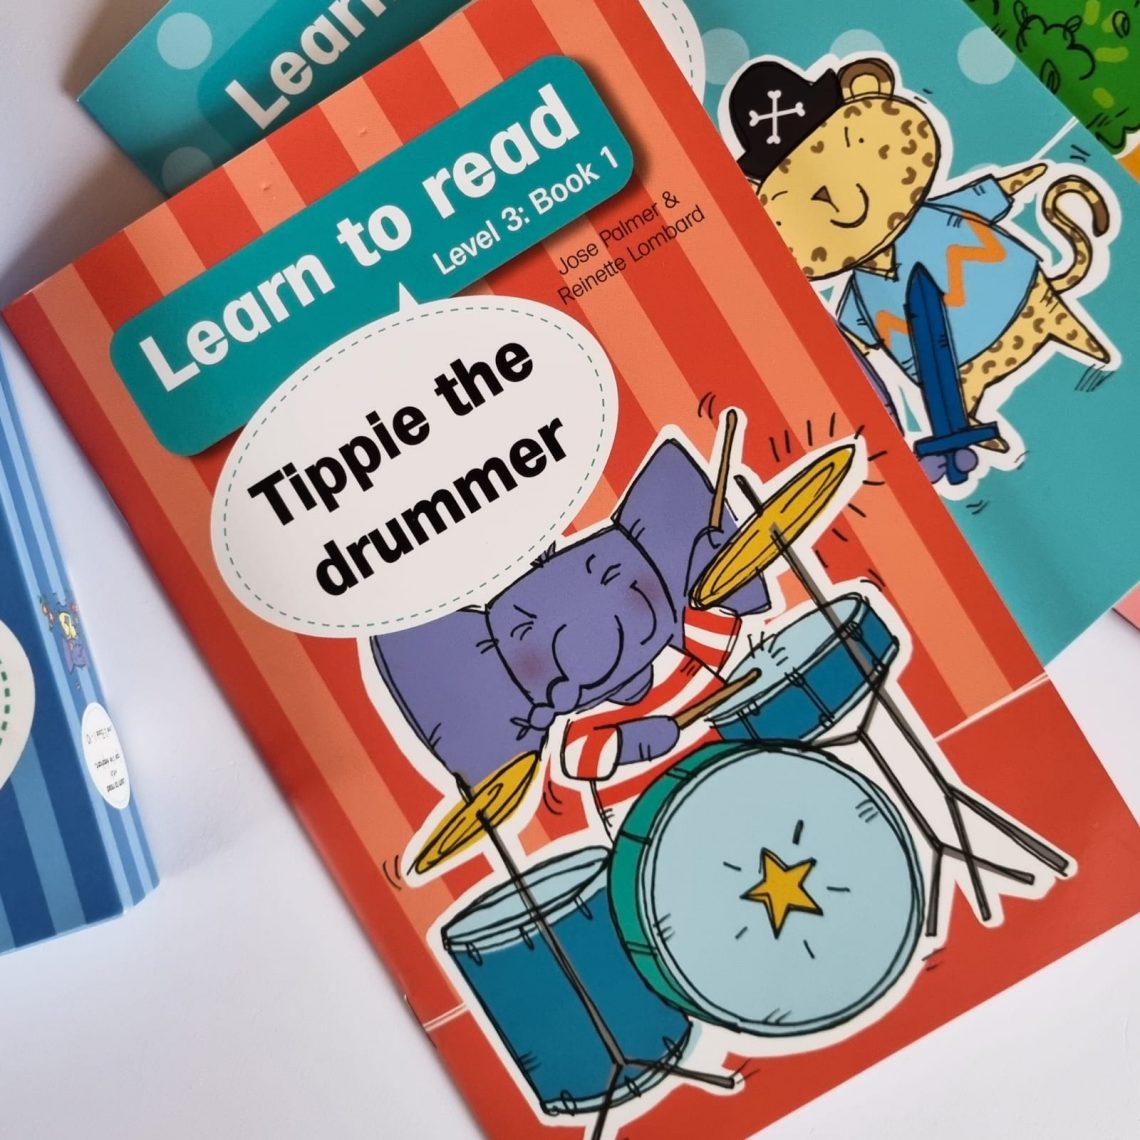 Learn to read with Tippie